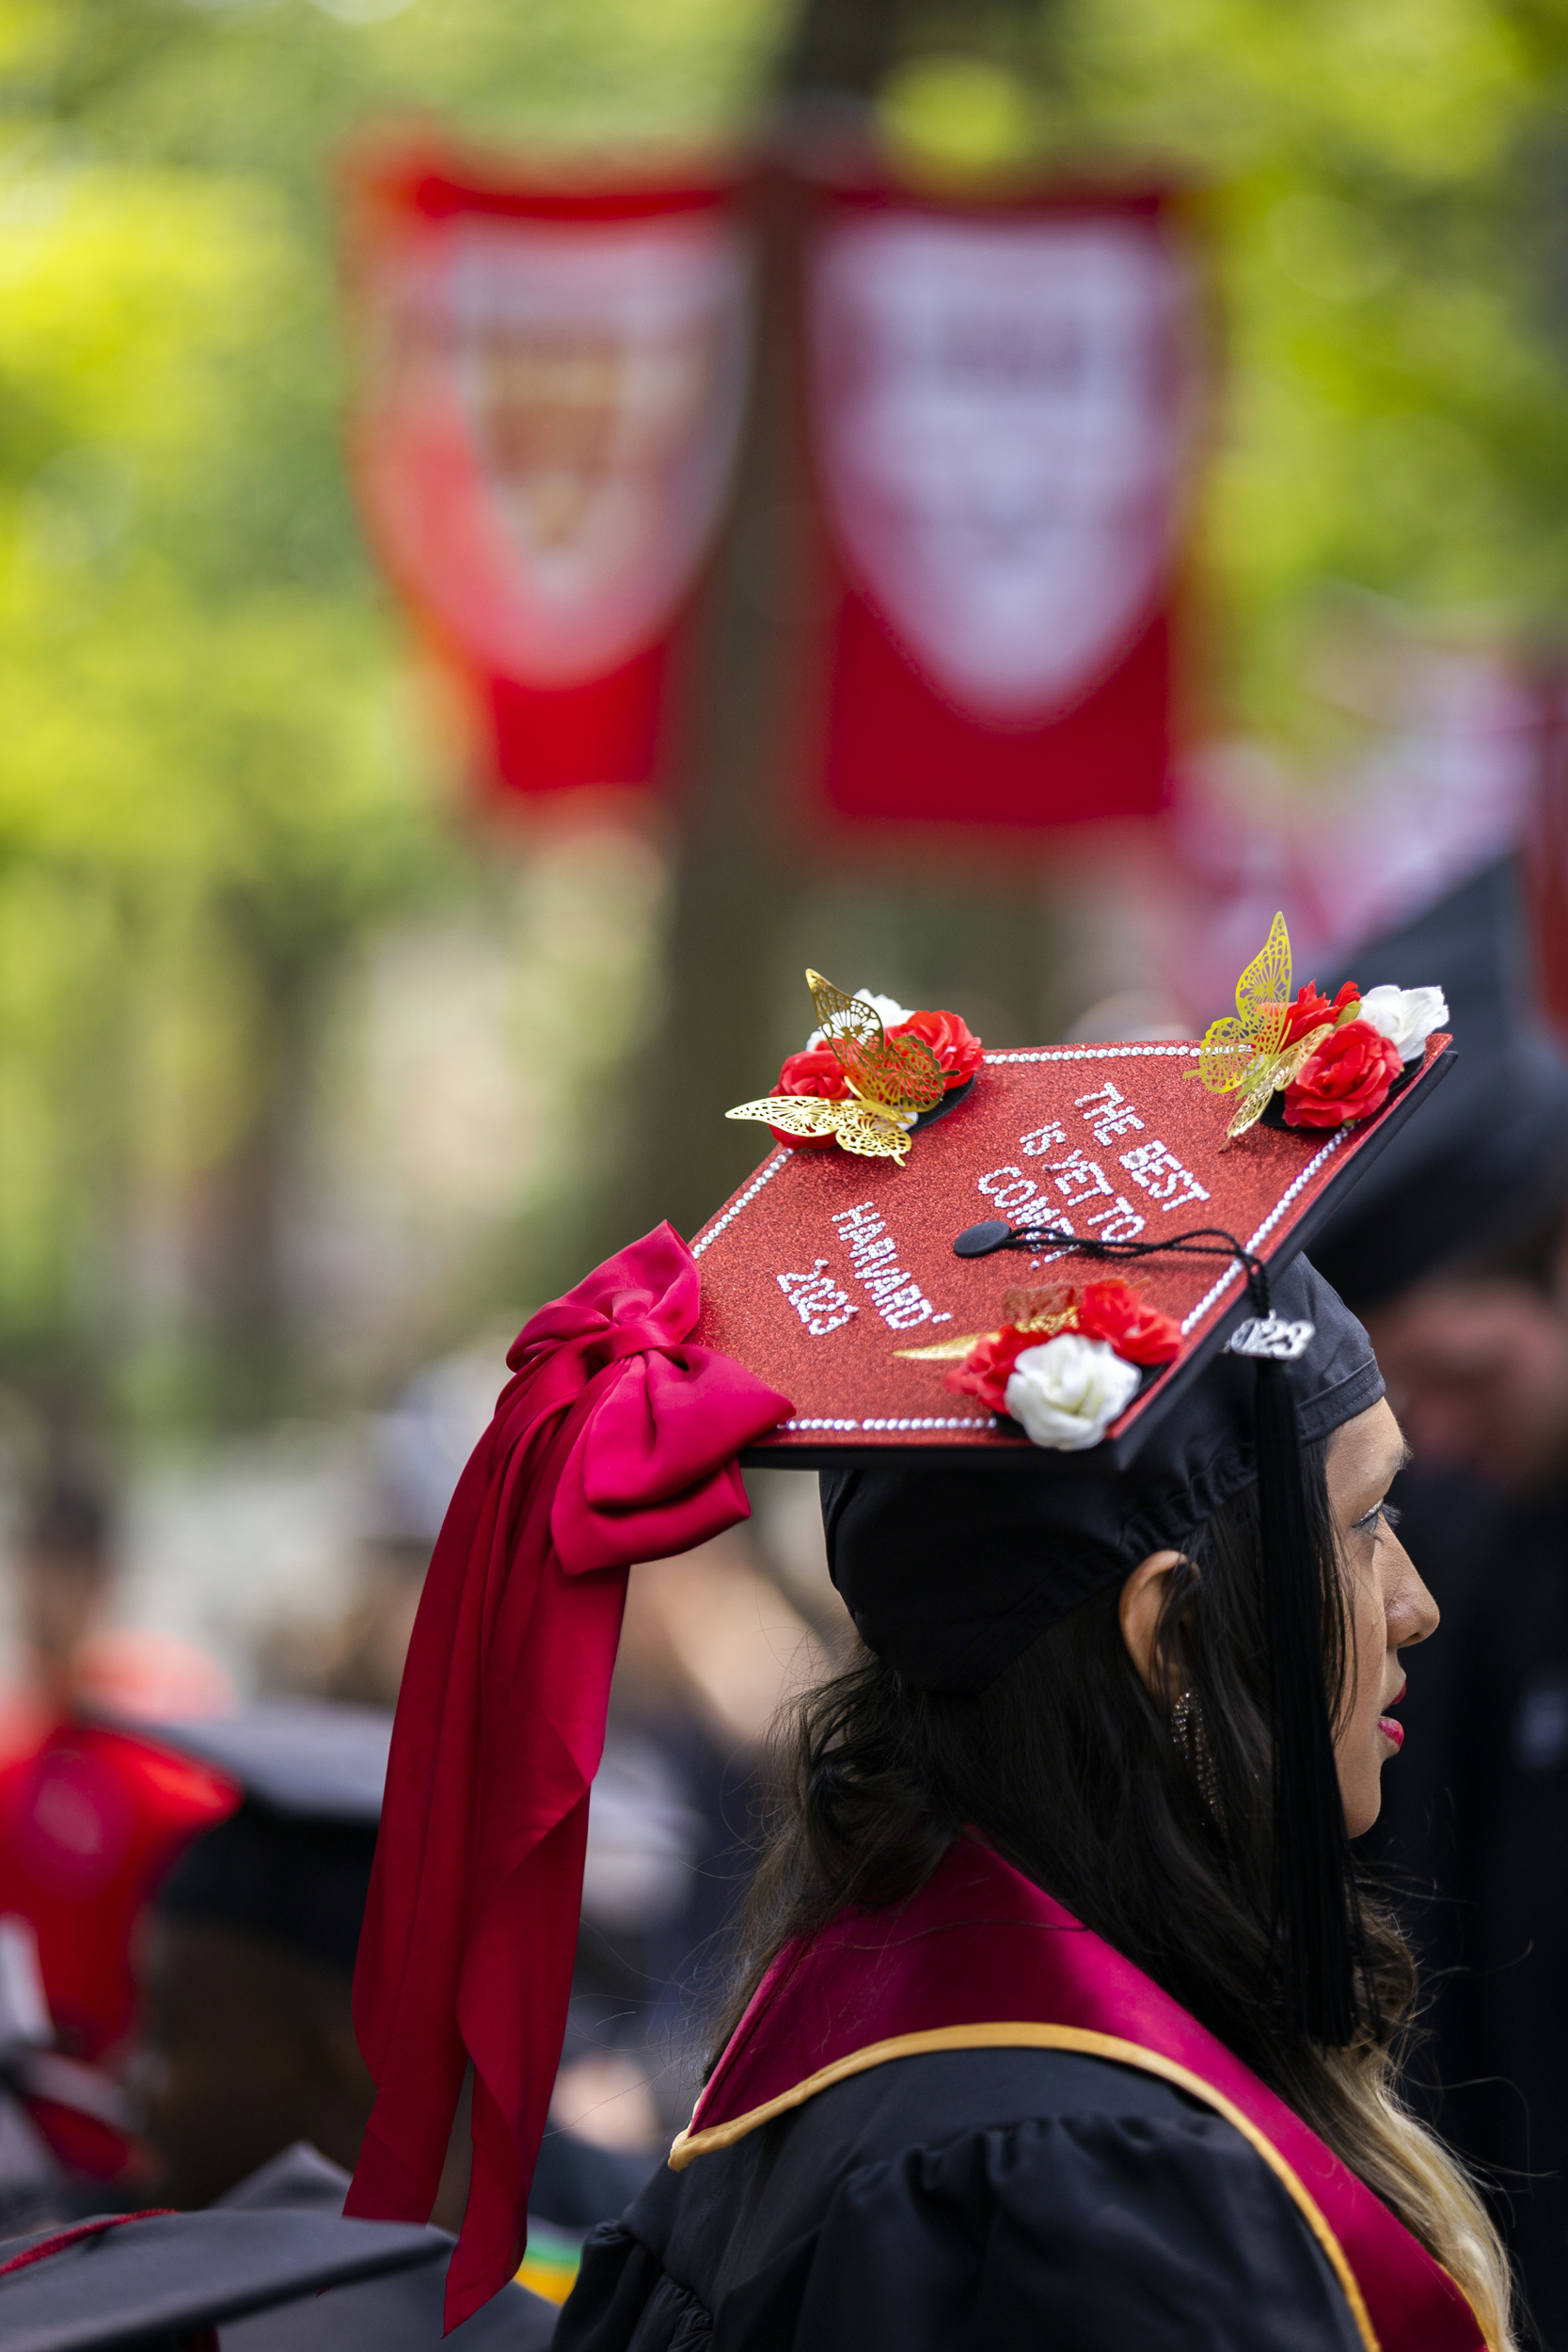 Nisha Sayed wears decorated mortarboard reading "The best is yet to come!"